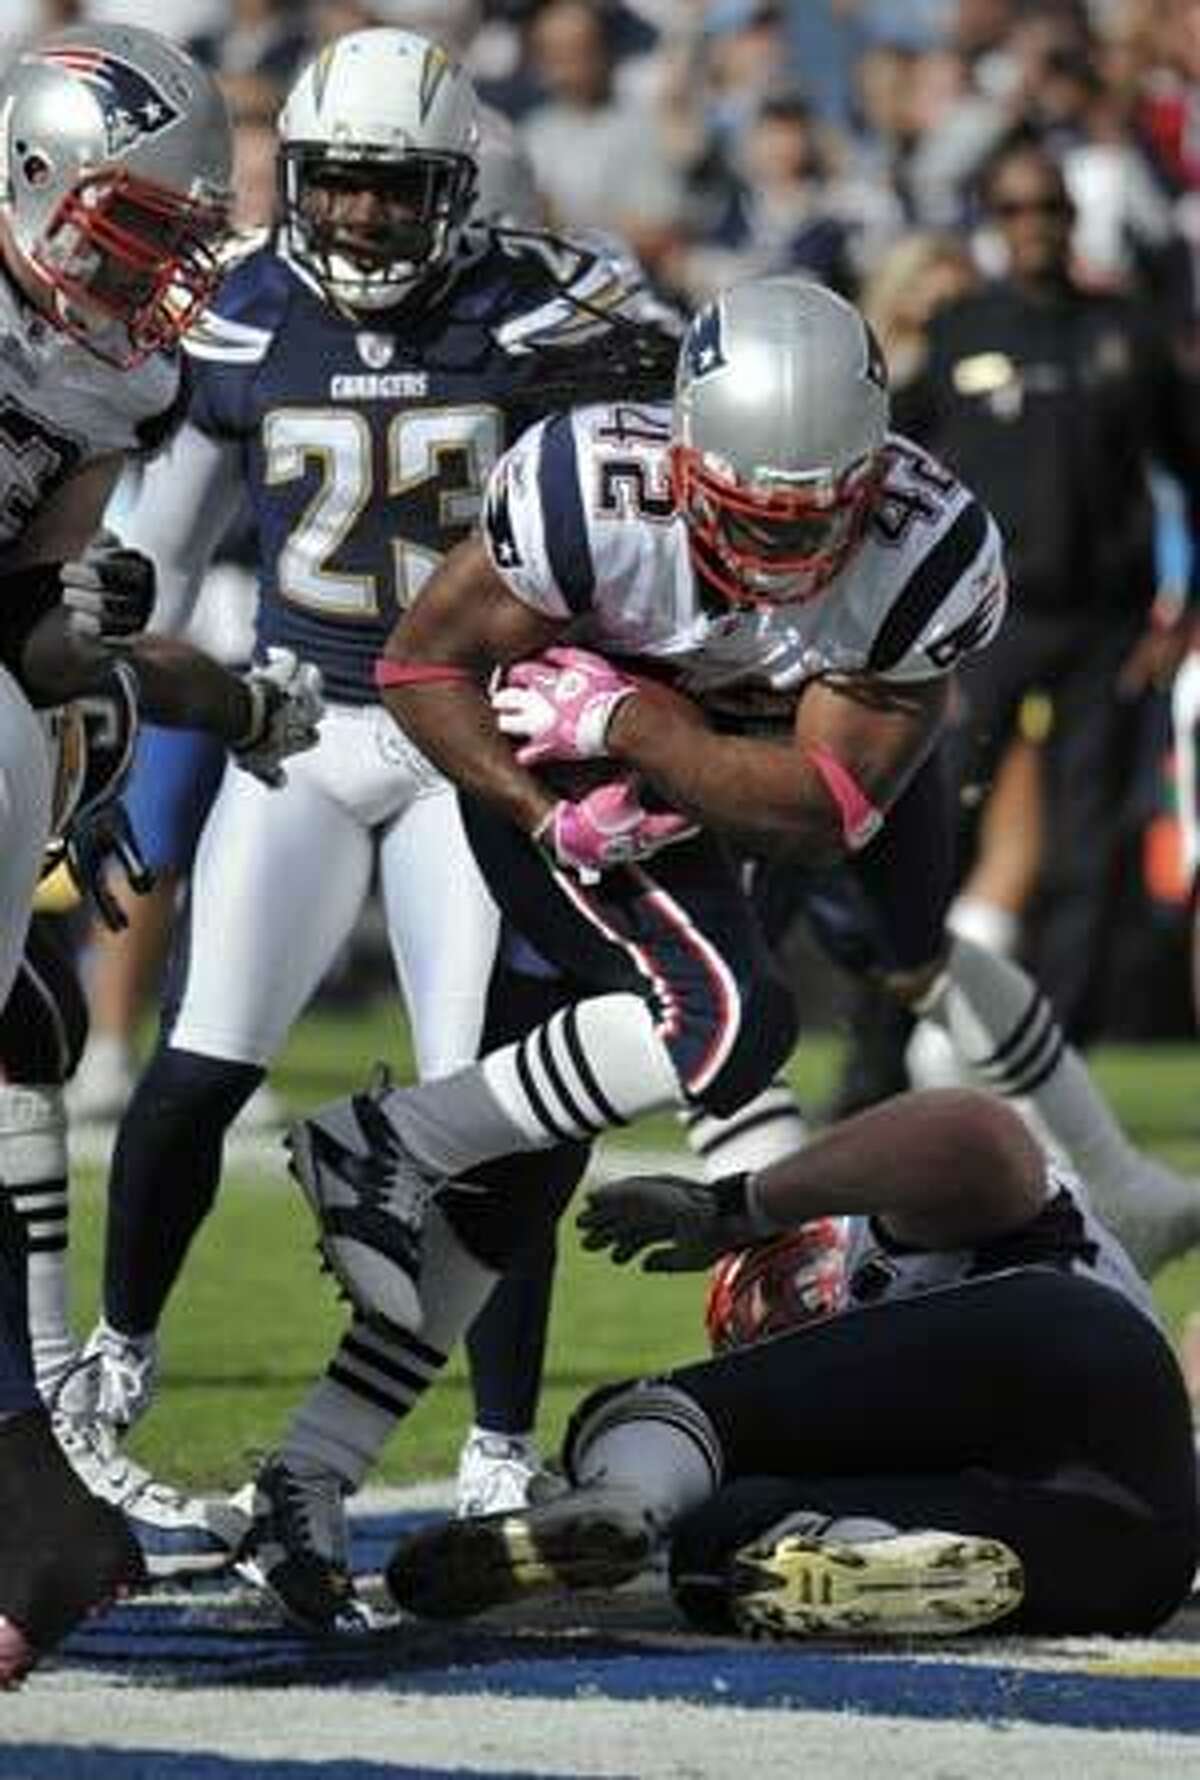 New England Patriots running back BenJarvus Green-Ellis runs in to the end zone for a touchdown against the San Diego Chargers in the second half during an NFL football game Sunday, Oct. 24, 2010, in San Diego. (AP Photo/Denis Poroy)